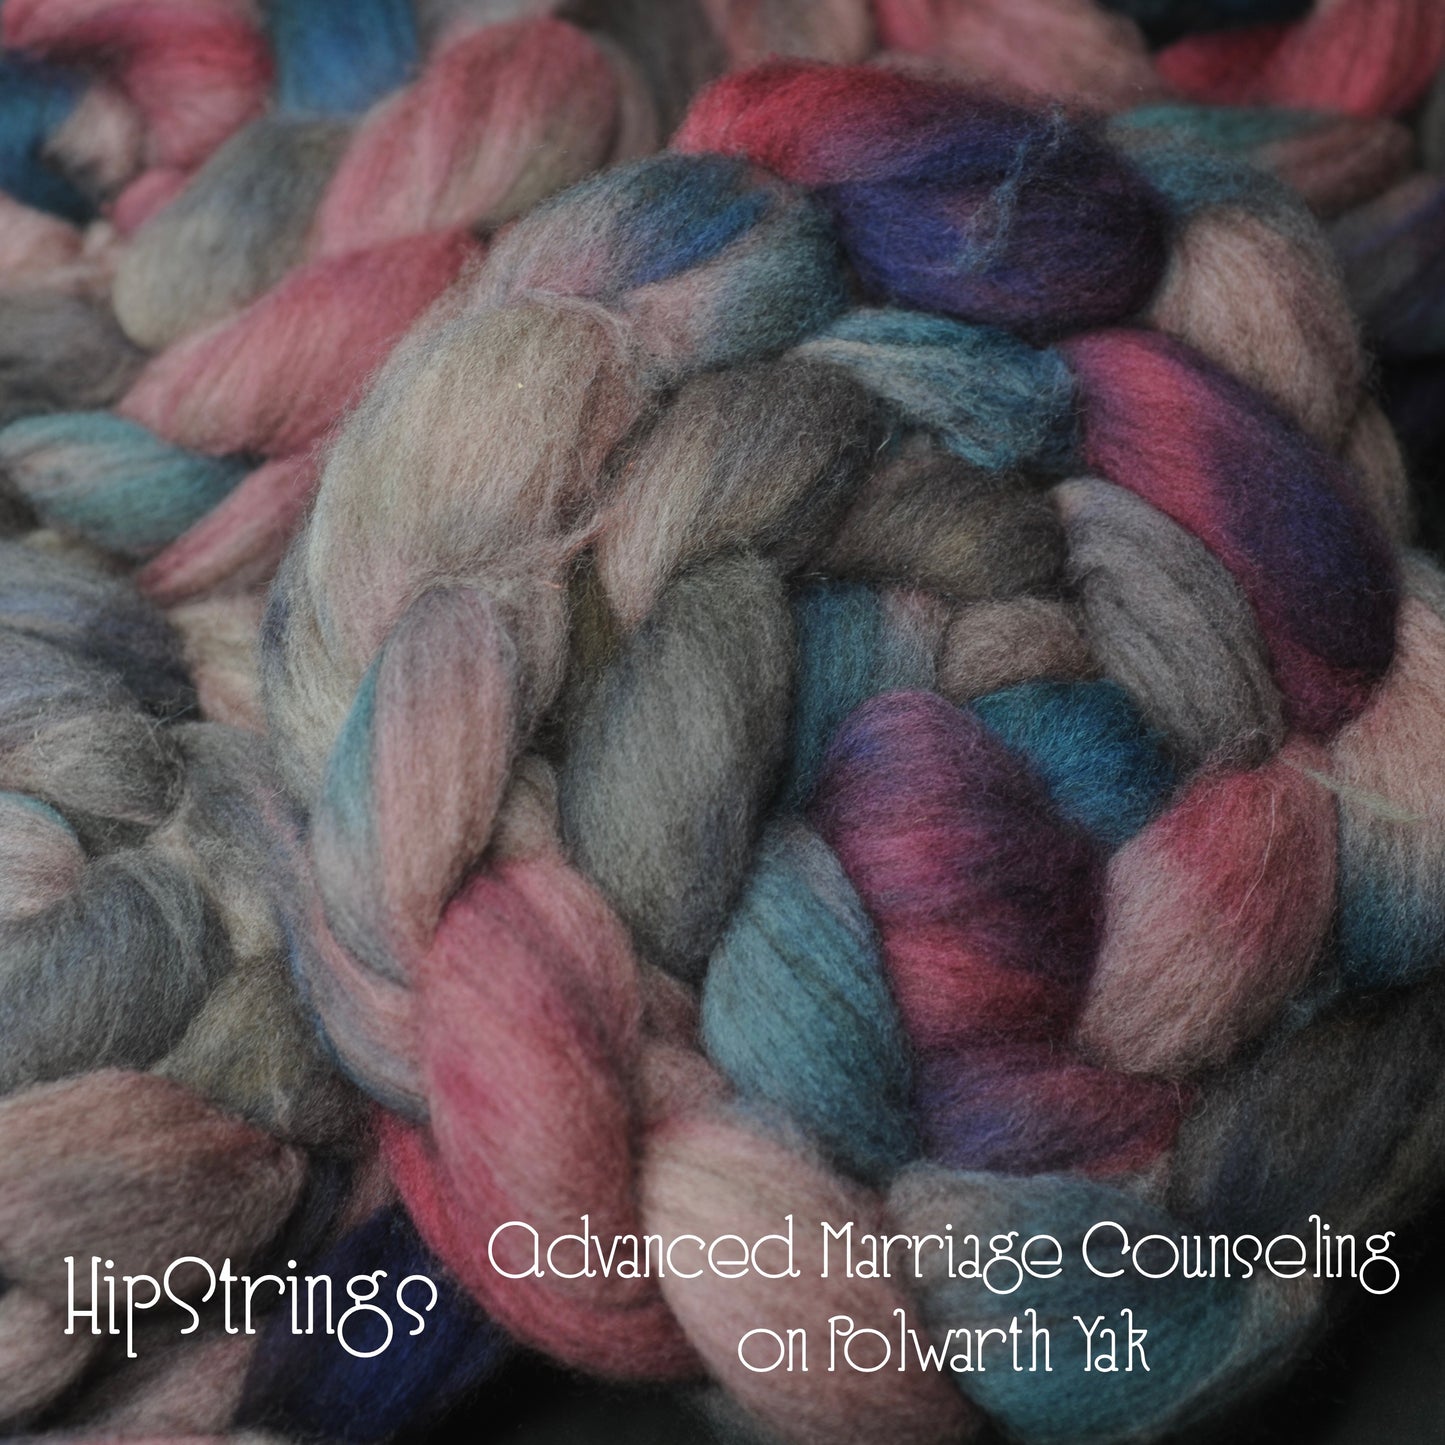 Advanced Marriage Counseling on Hand Dyed 60/40 Polwarth Wool Yak Combed Top - 4 oz